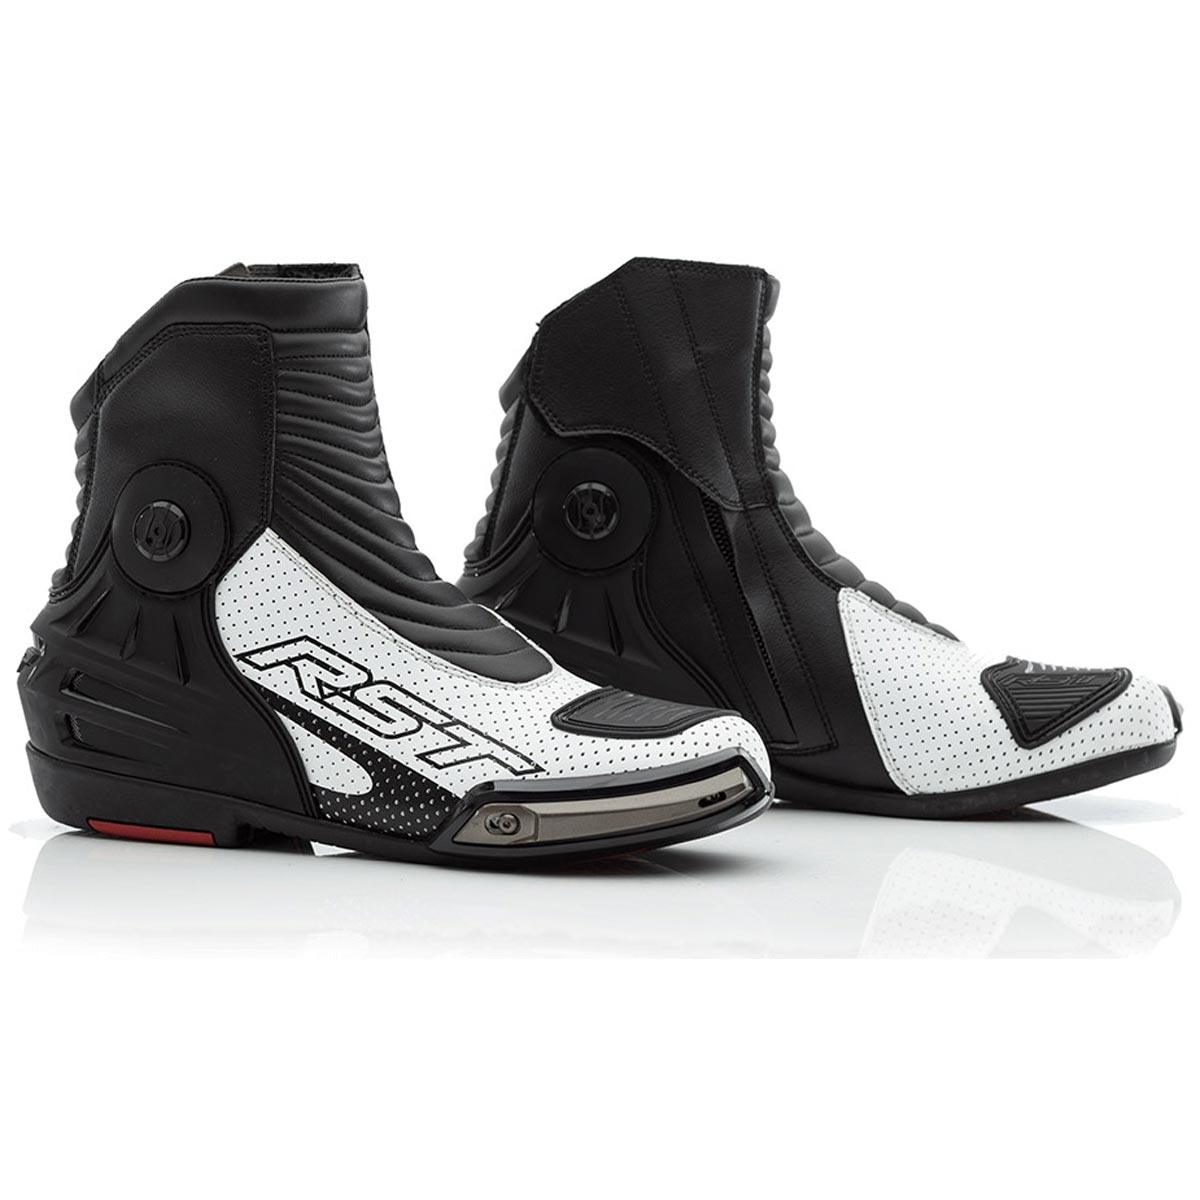 RST Tractech Evo III Short Boots CE White Black 48